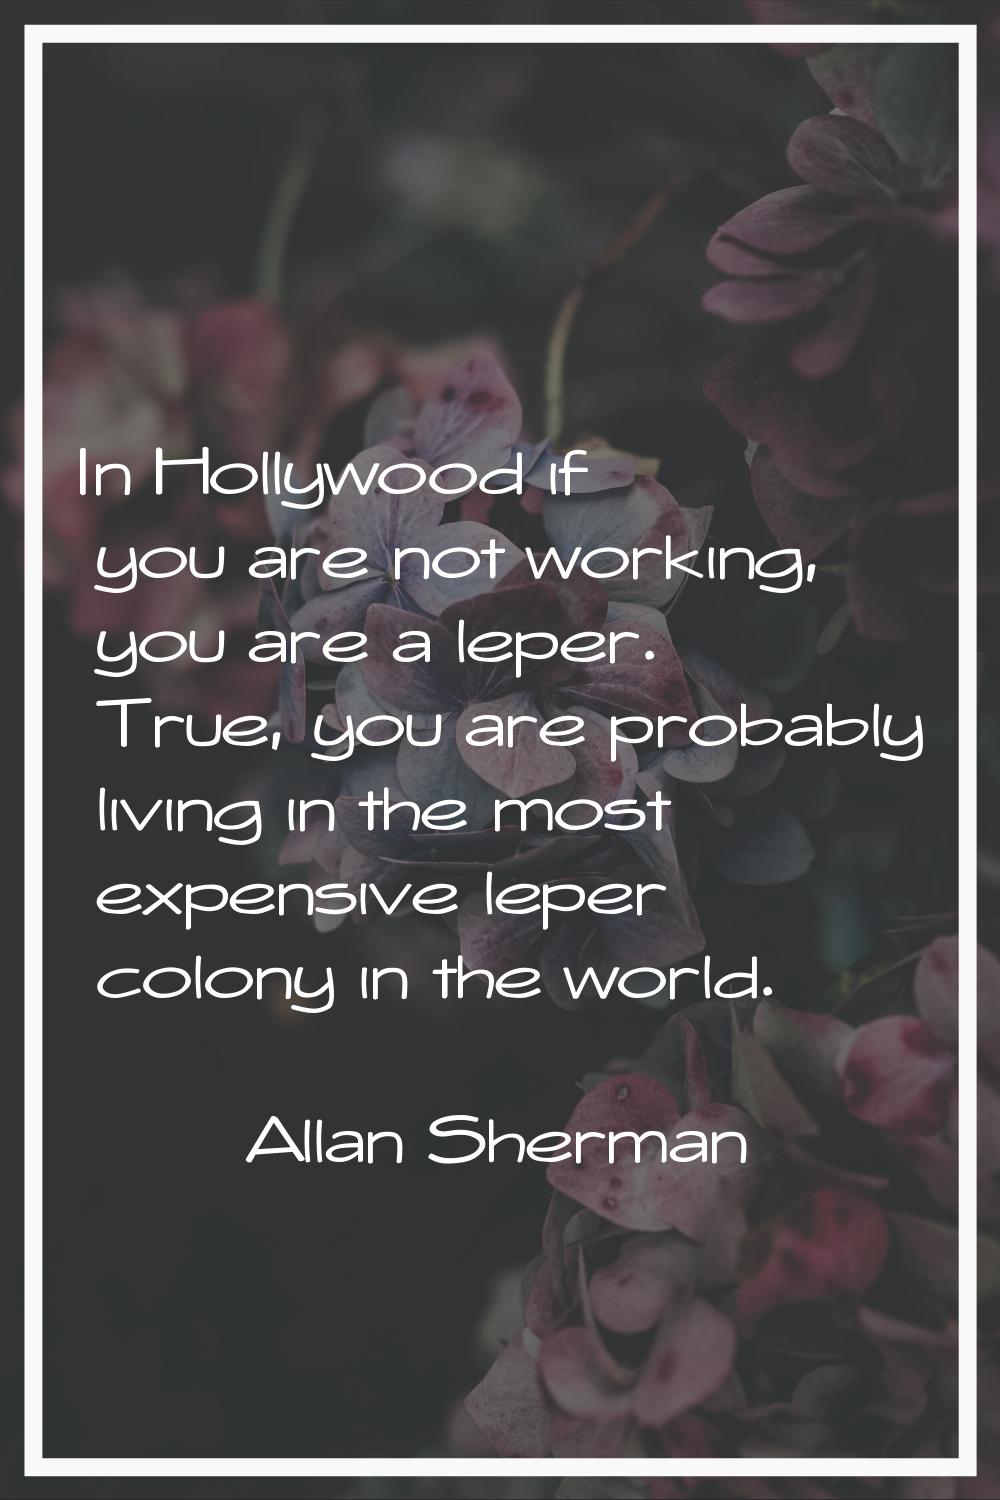 In Hollywood if you are not working, you are a leper. True, you are probably living in the most exp